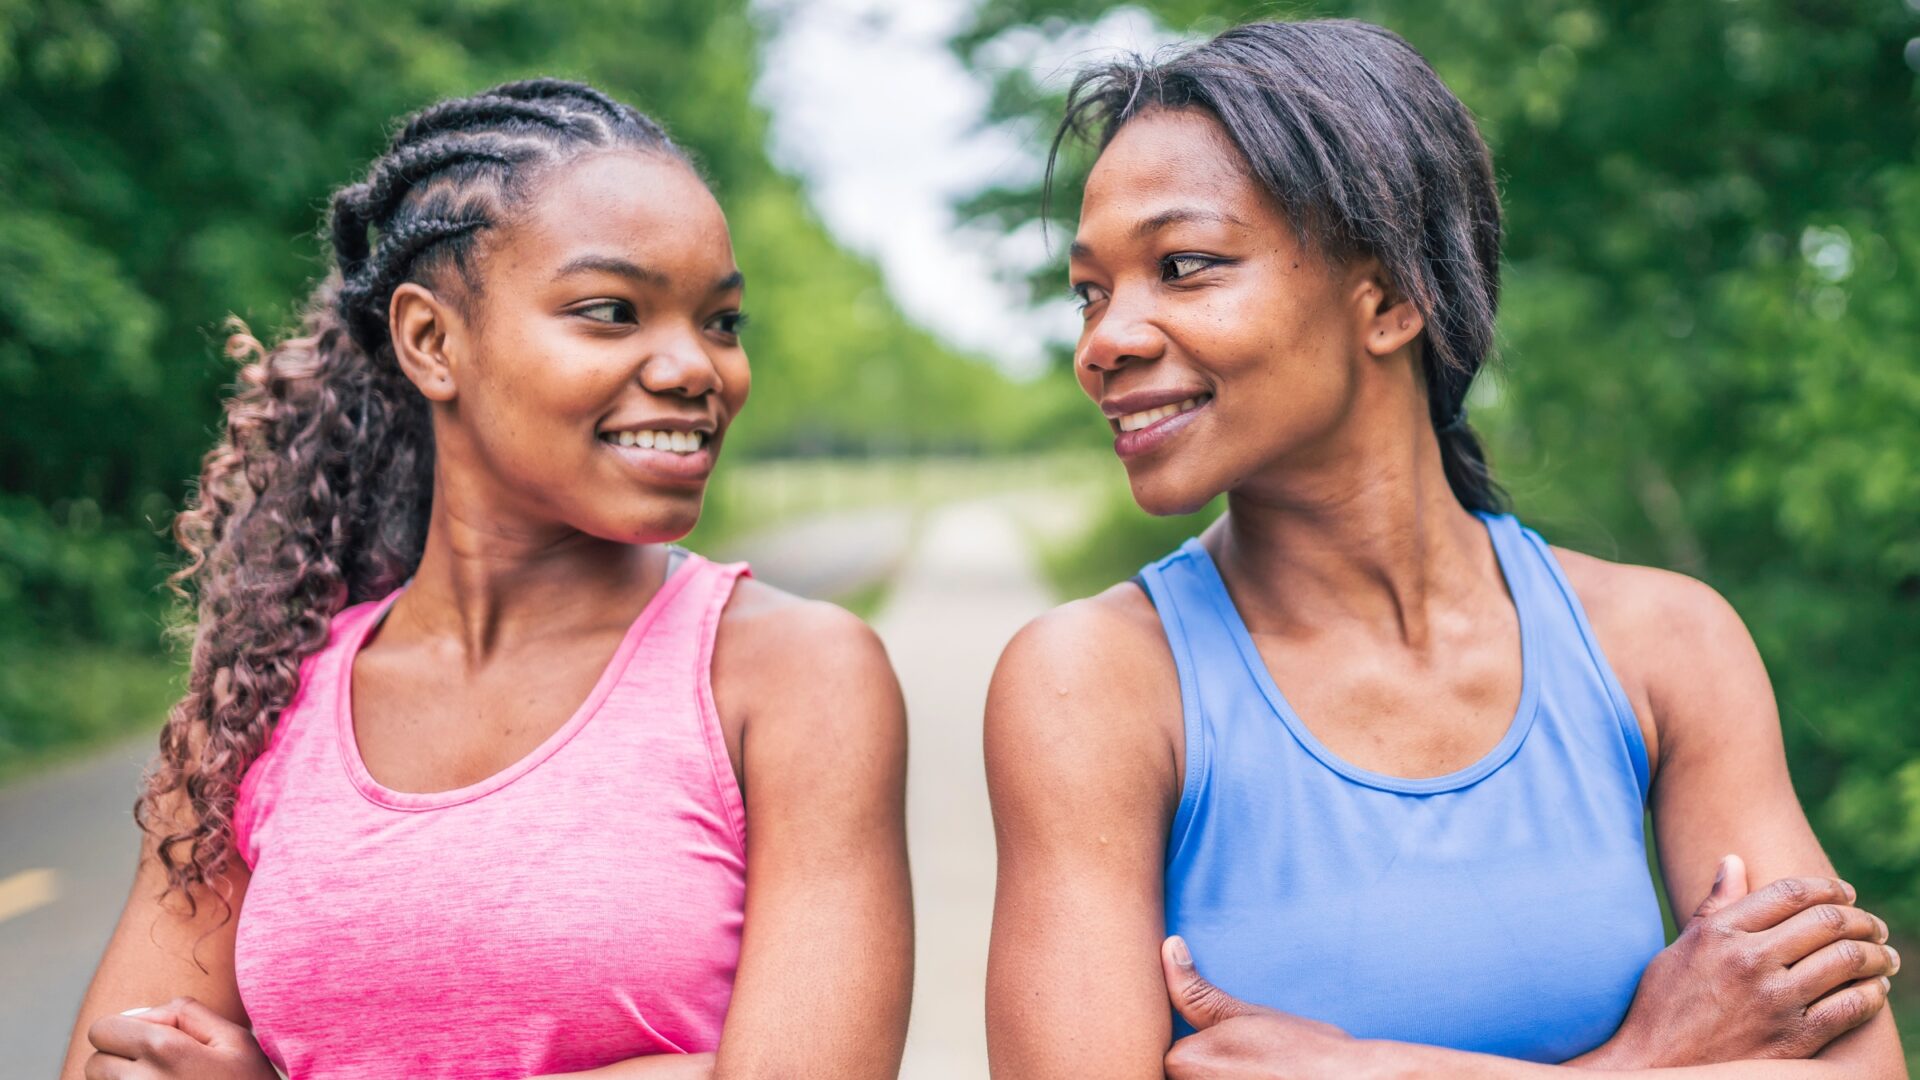 Smiling mother and daughter duo looking at each other after going for a run.